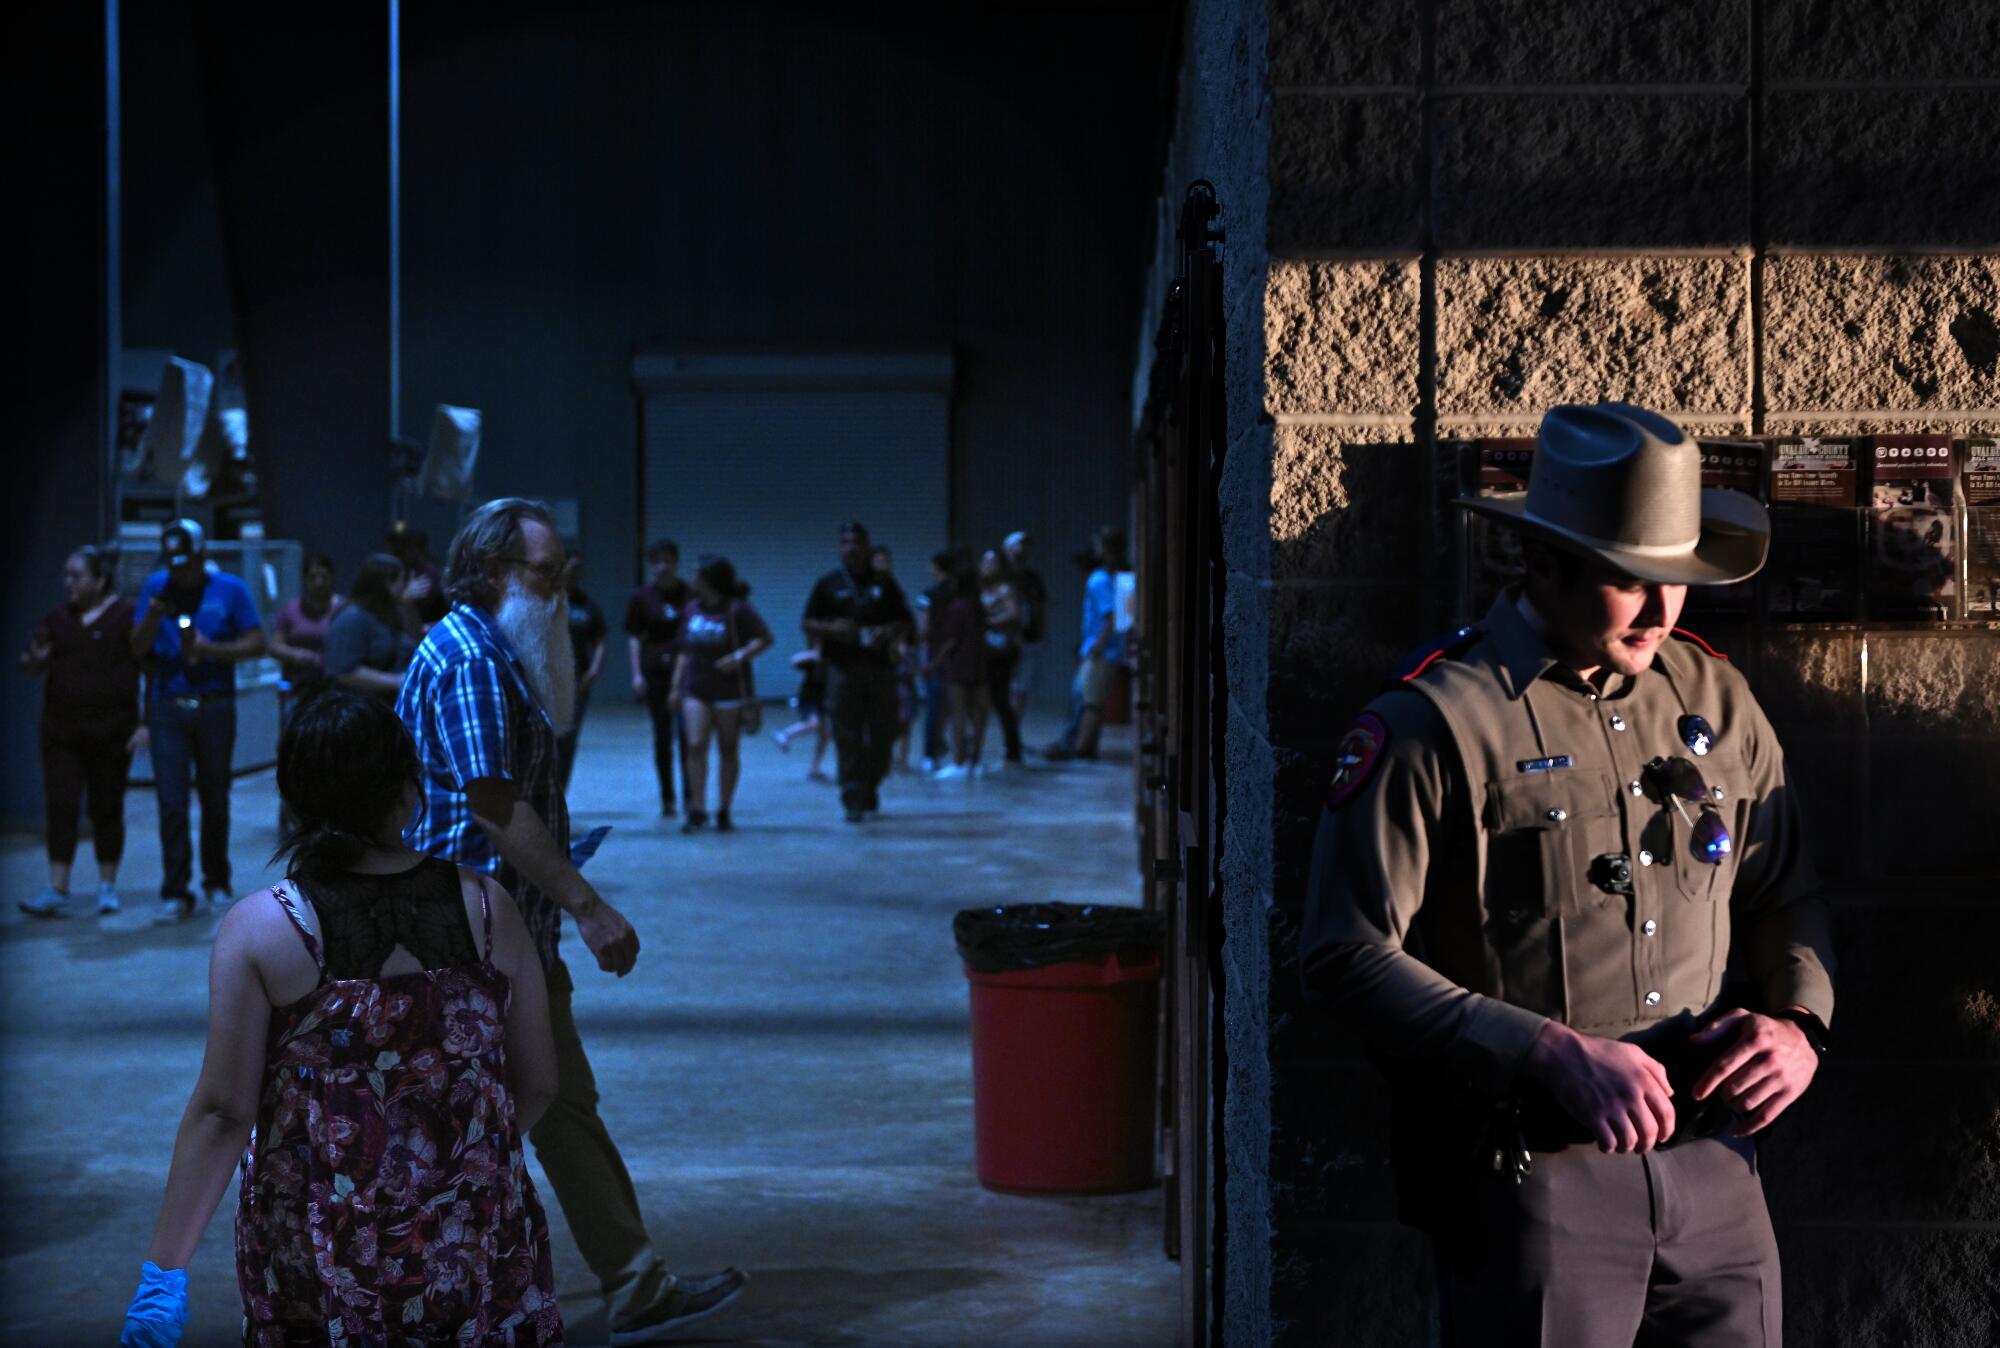 A police officer guards the door at the Uvalde County Fairplex during a vigil to honor the victims.